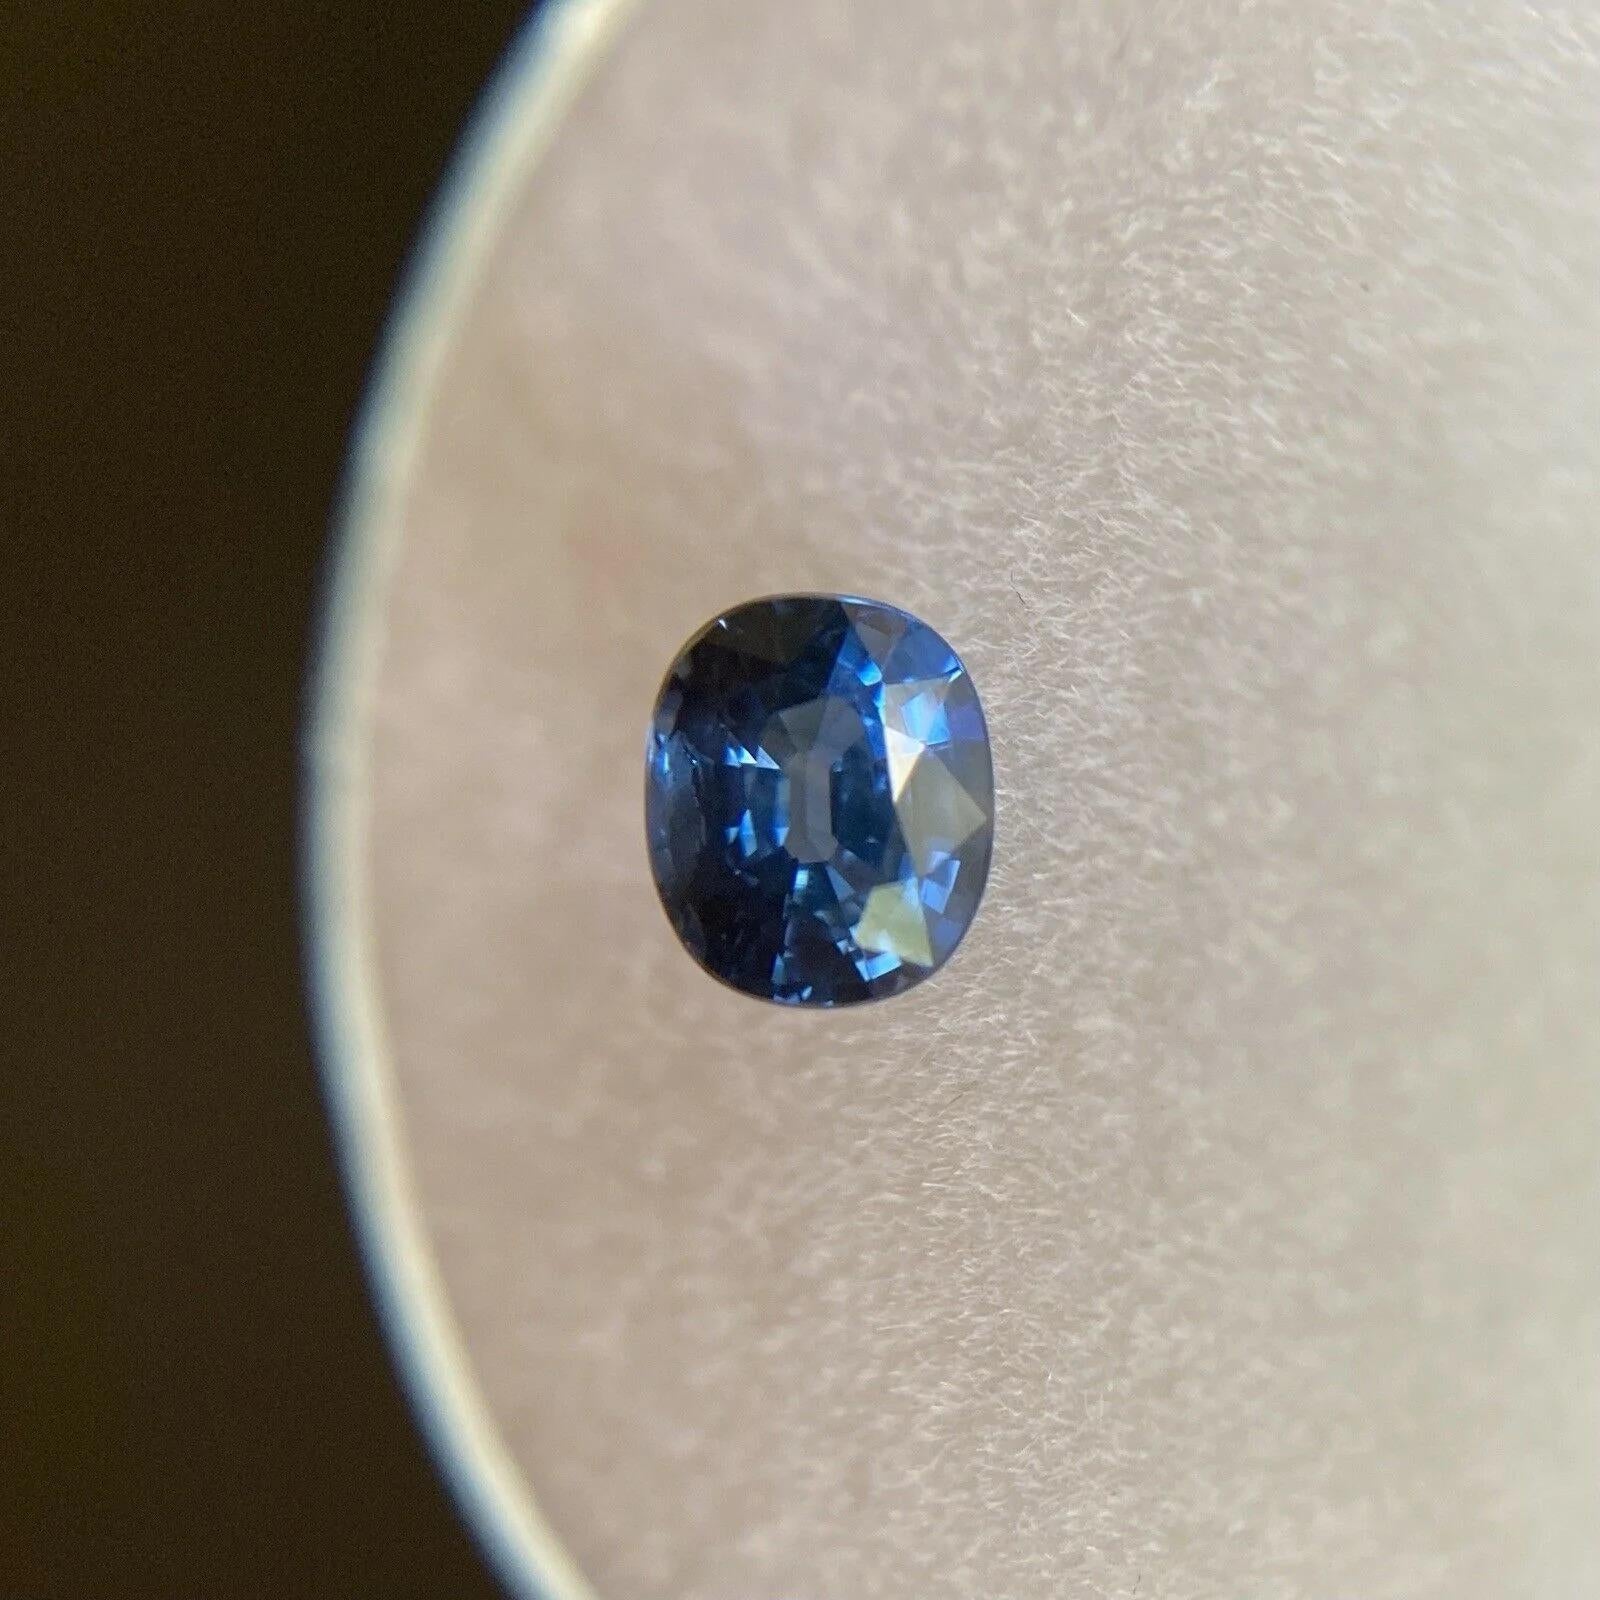 Fine Royal Blue Sapphire 0.68ct Cushion Cut Loose Rare Gem 5.2x4.3mm

Fine Royal Blue Australian Sapphire Gemstone.
0.68 Carat with a beautiful royal blue colour and very good clarity. Clean stone with only some small natural inclusions visible when